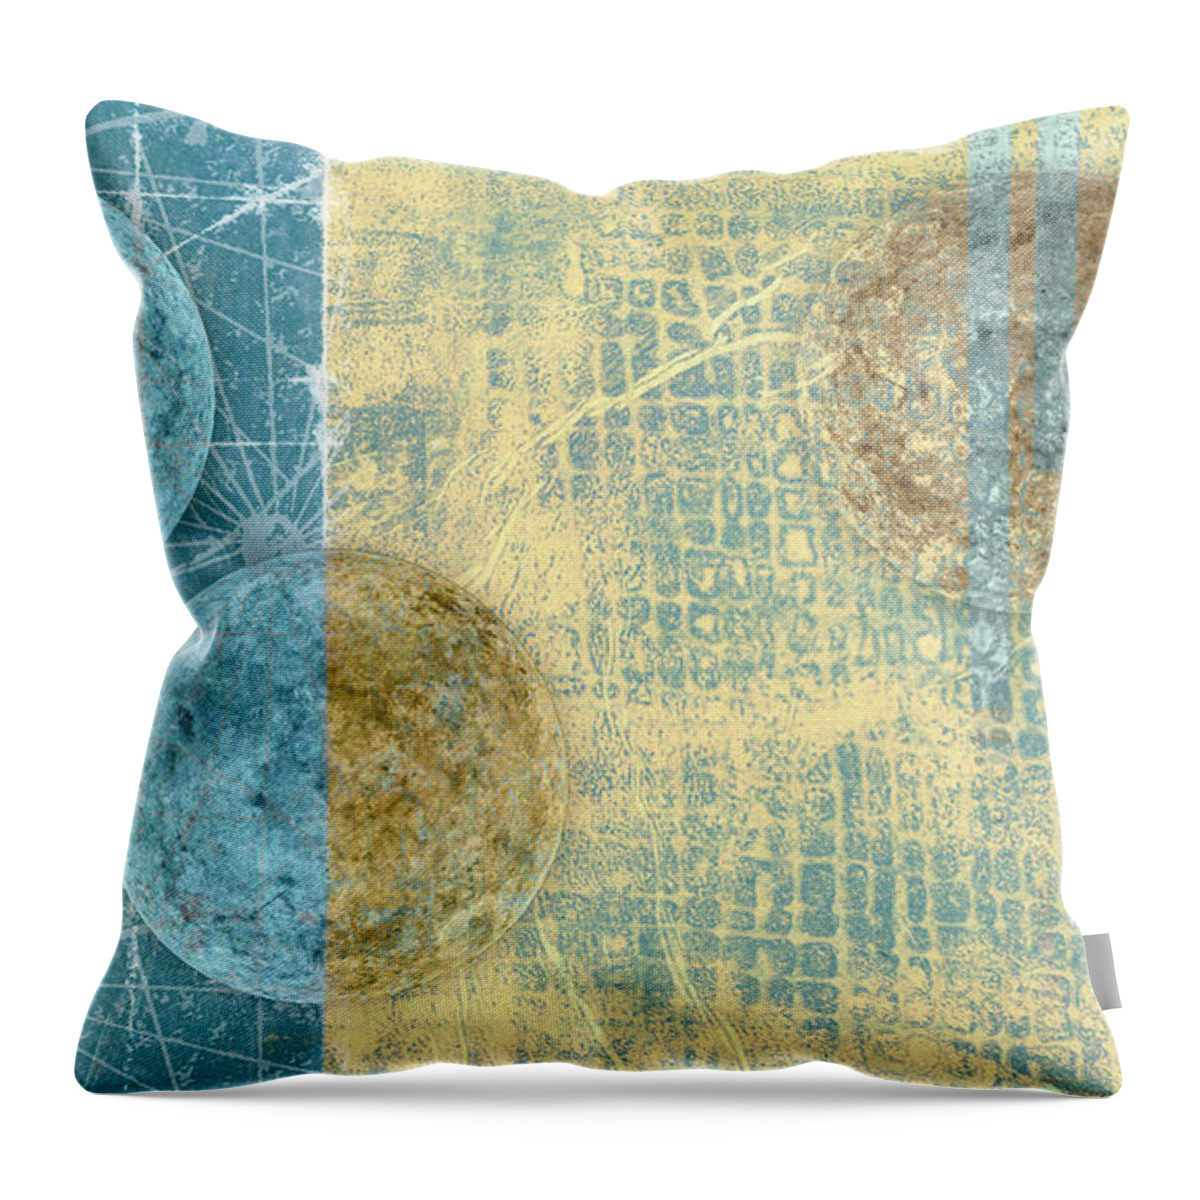 Star Throw Pillow featuring the photograph Star Chart Landing Pattern by Carol Leigh